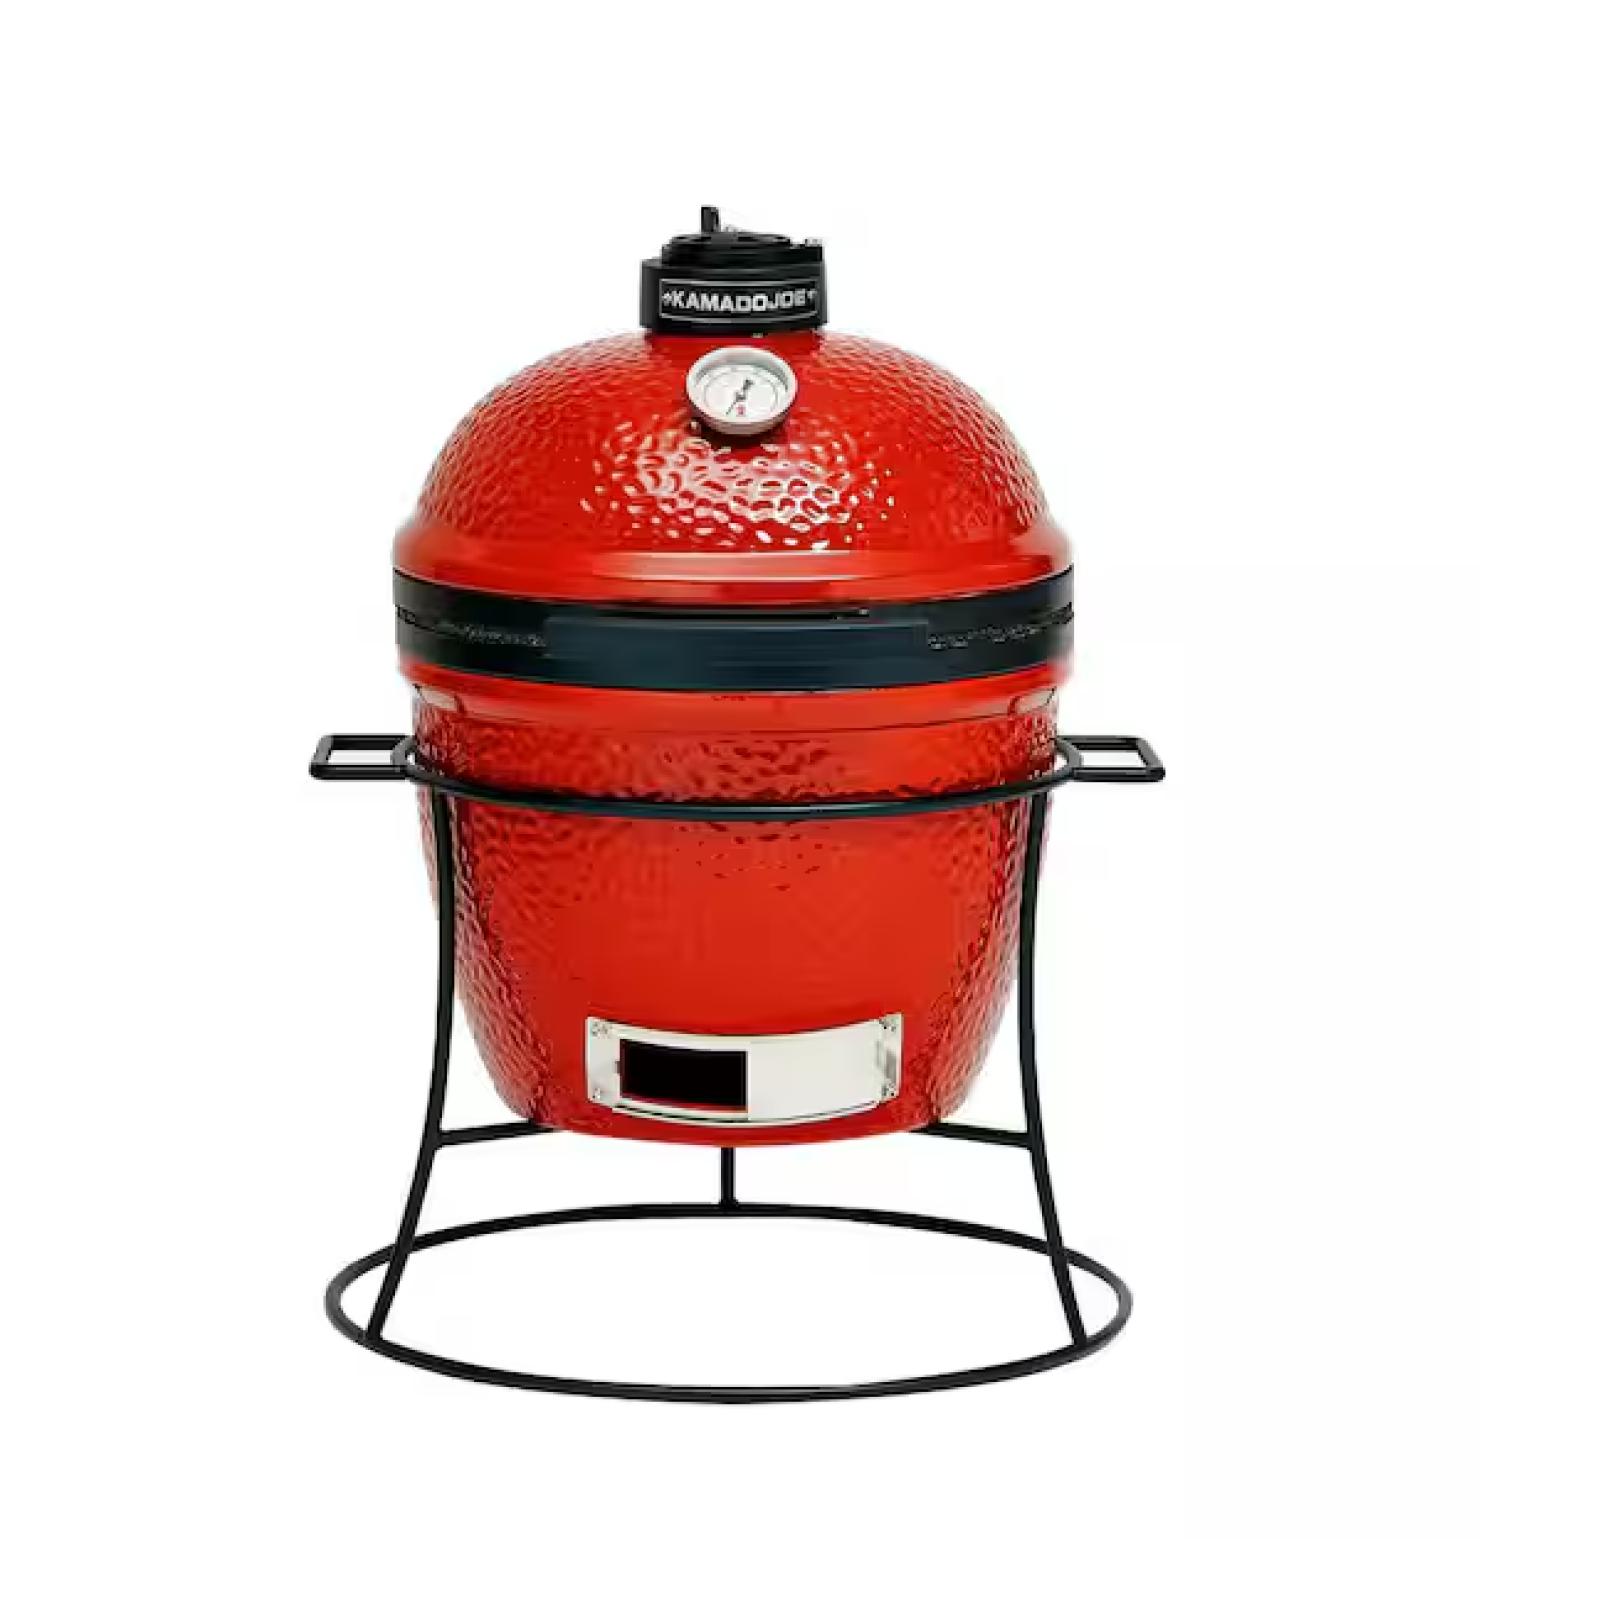 NEW! - Kamado Joe Joe Jr. 13.5 in. Portable Charcoal Grill in Red with Cast Iron Cart, Heat Deflectors and Ash Tool